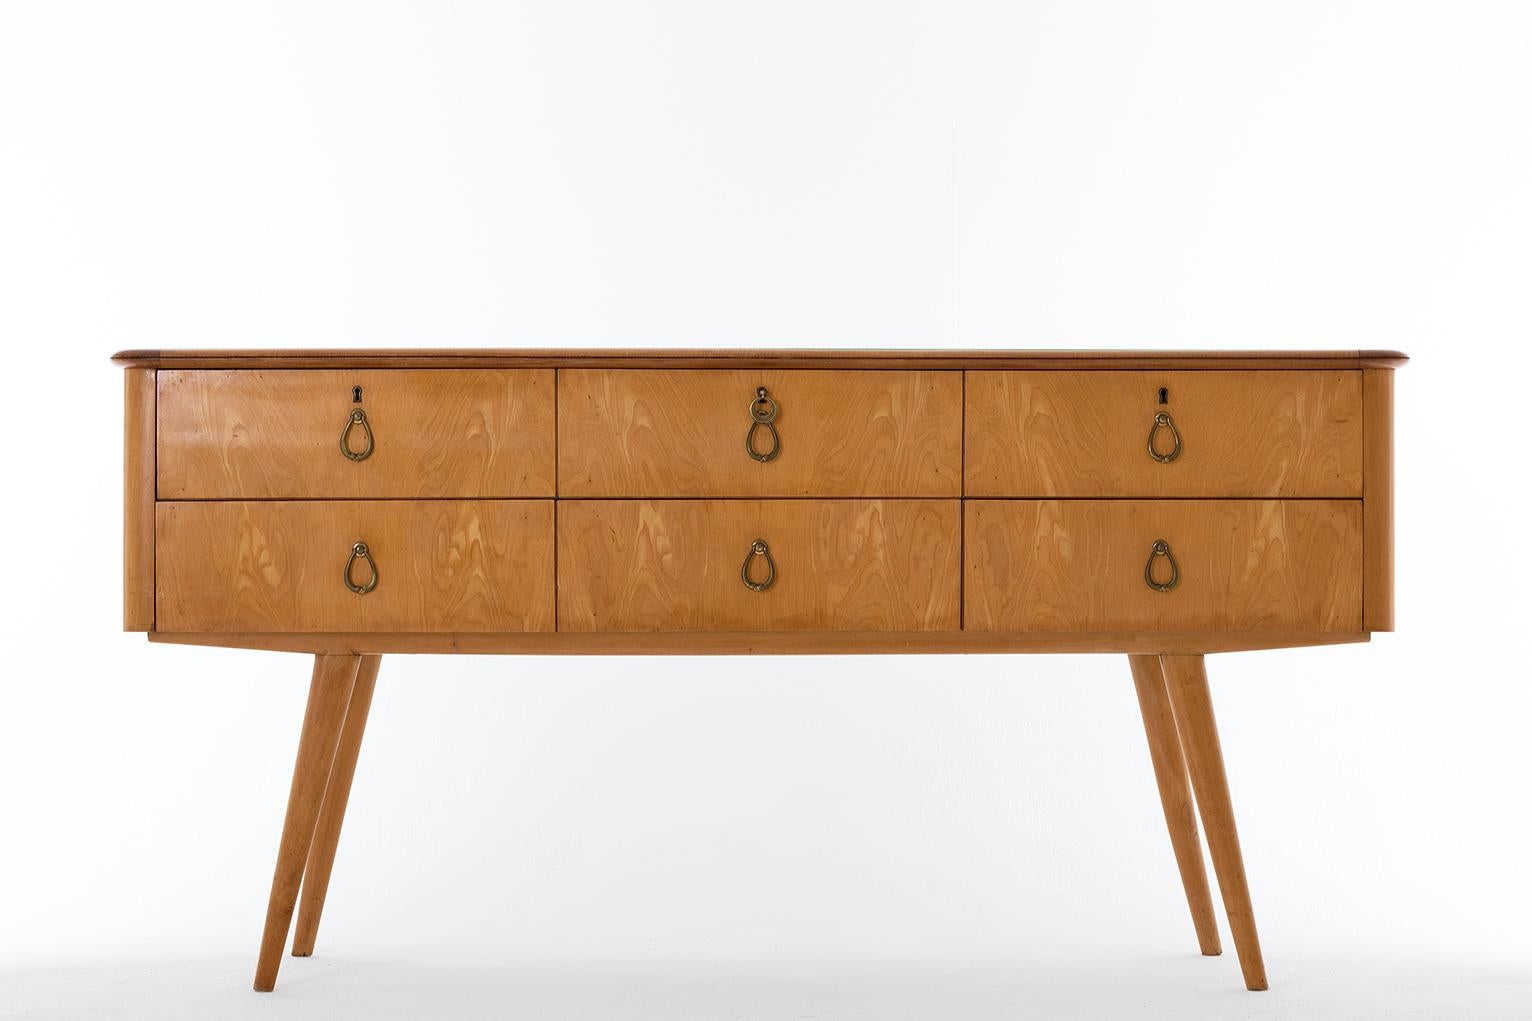 A large sycamore chest of drawers, the glass shaped top above six drawers with brass handles, with its original key, on four tapered and angled long legs,
Italy, late 1940s-early 1950s.